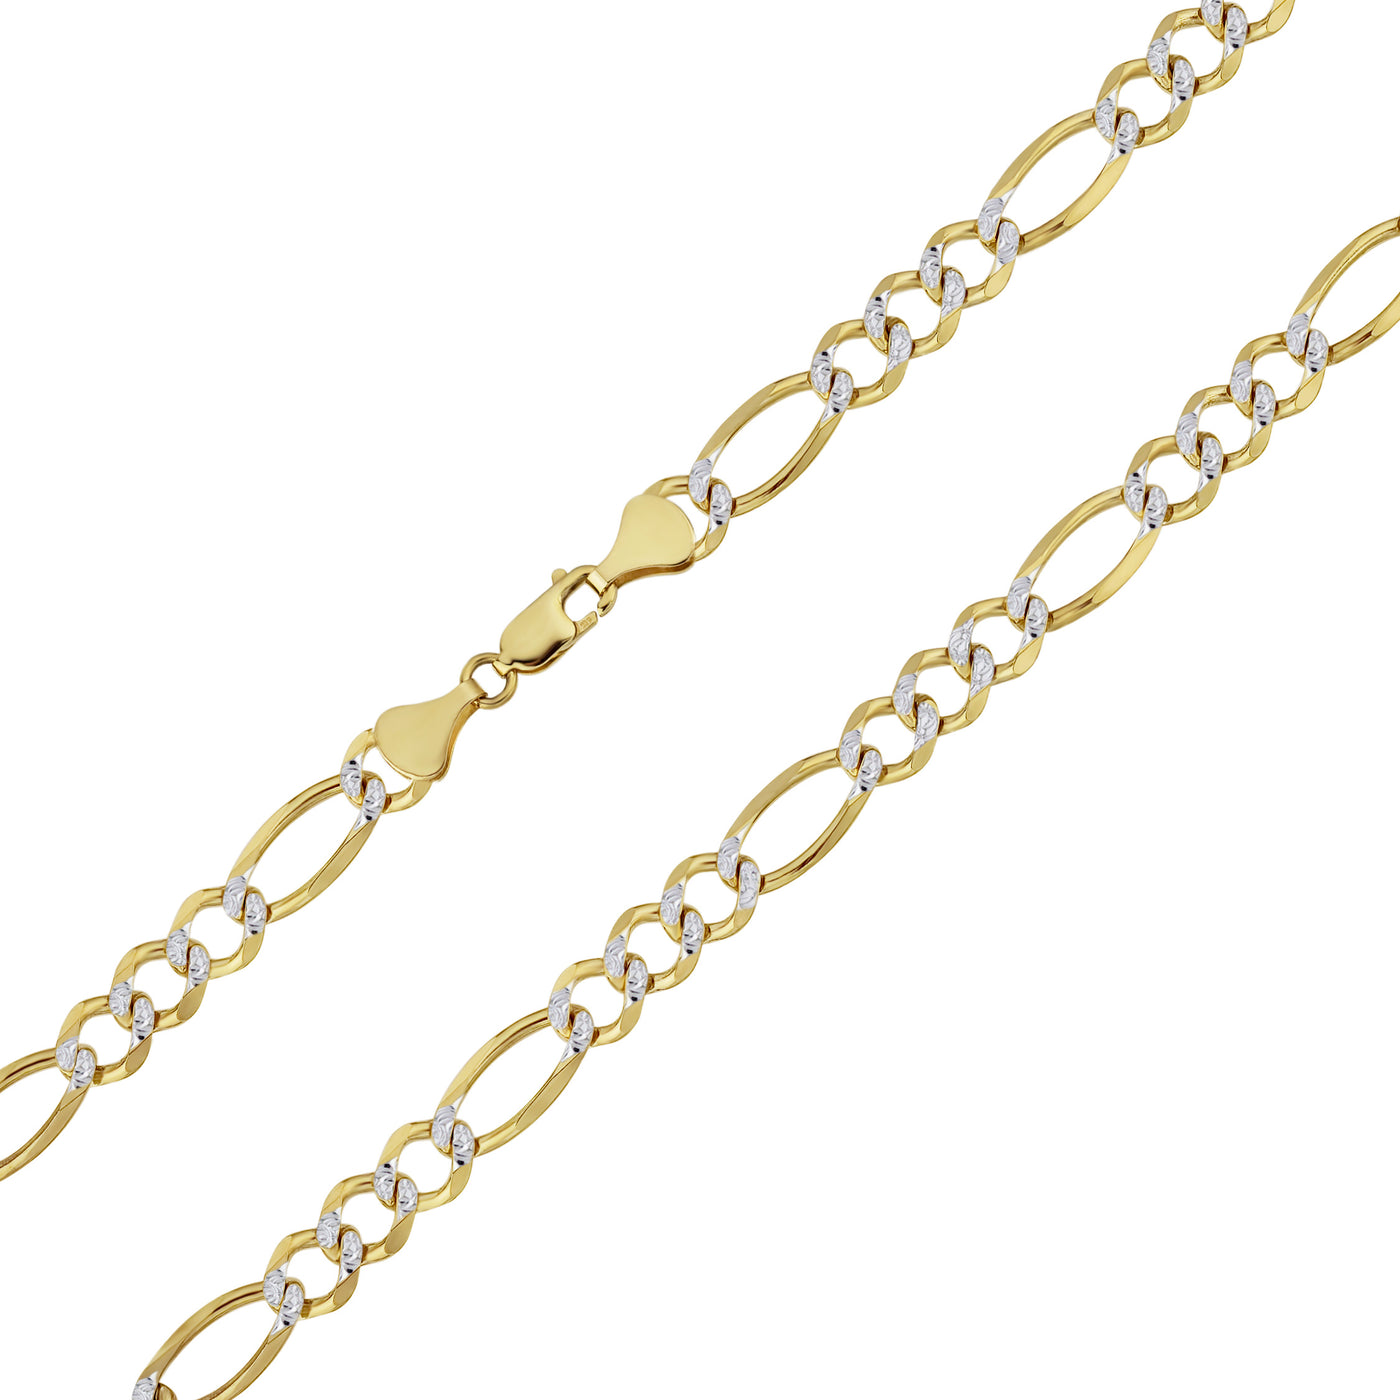 Men's Pave Figaro Chain 10K Yellow White Gold - Solid